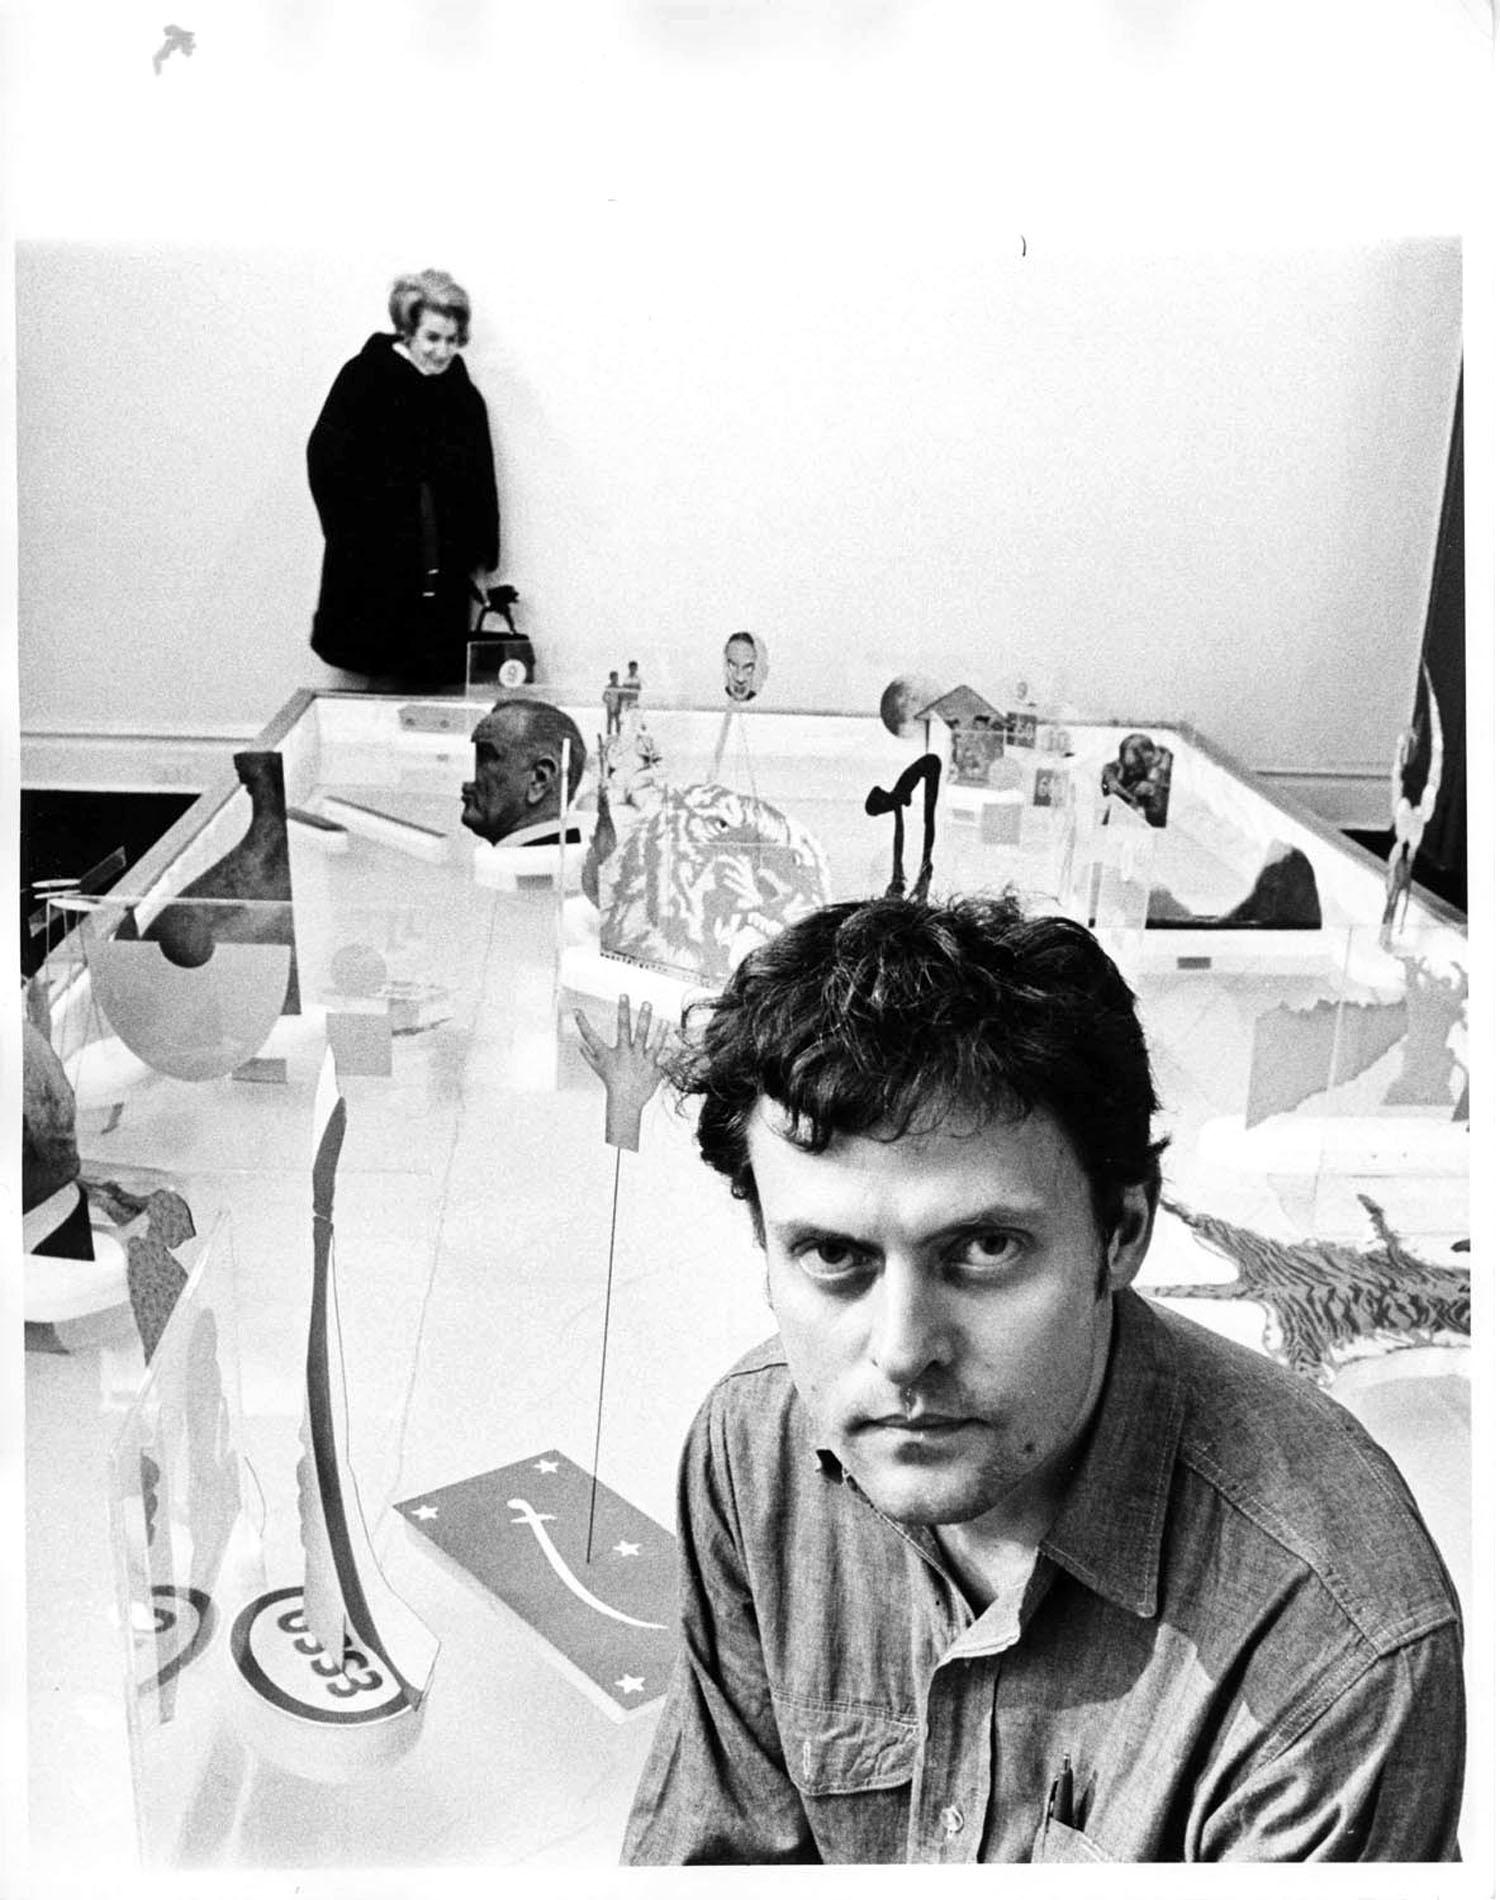 11 x 14" vintage silver gelatin photograph of Swedish Multimedia artist Oyvind Fahlstrom at an exhibition of his work in Manhattan, 1969. Signed on the verso by Jack Mitchell. Comes directly from the Jack Mitchell Archives with a certificate of